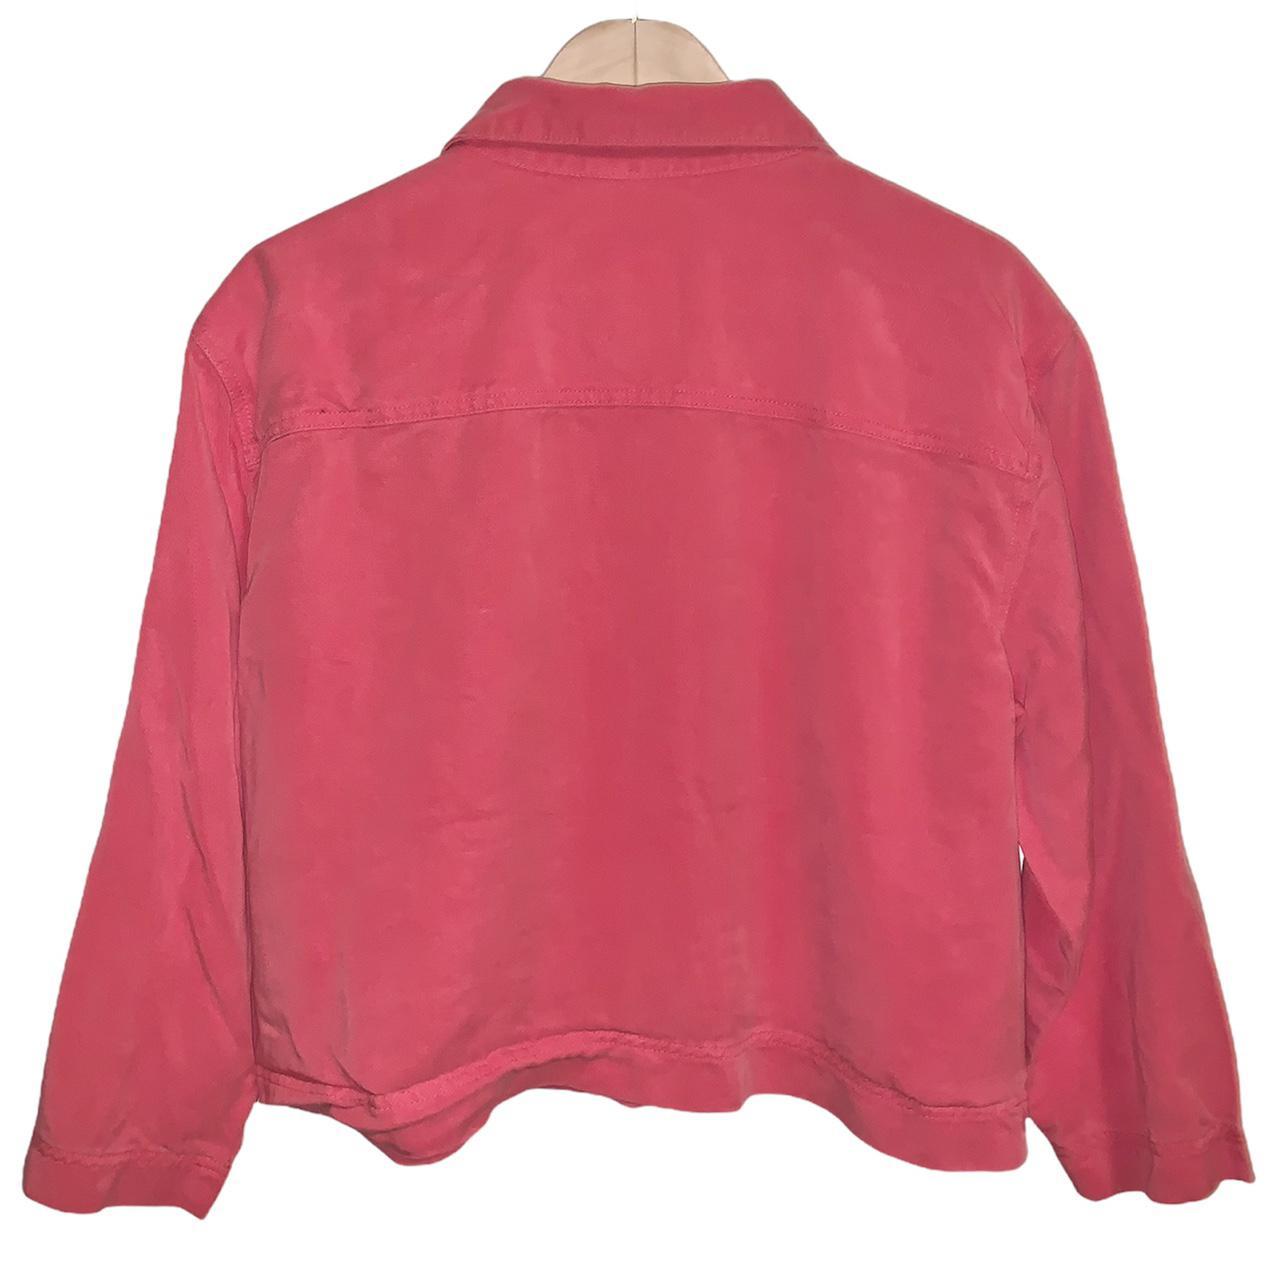 Product Image 2 - Bright Coral Pink Lightweight Button